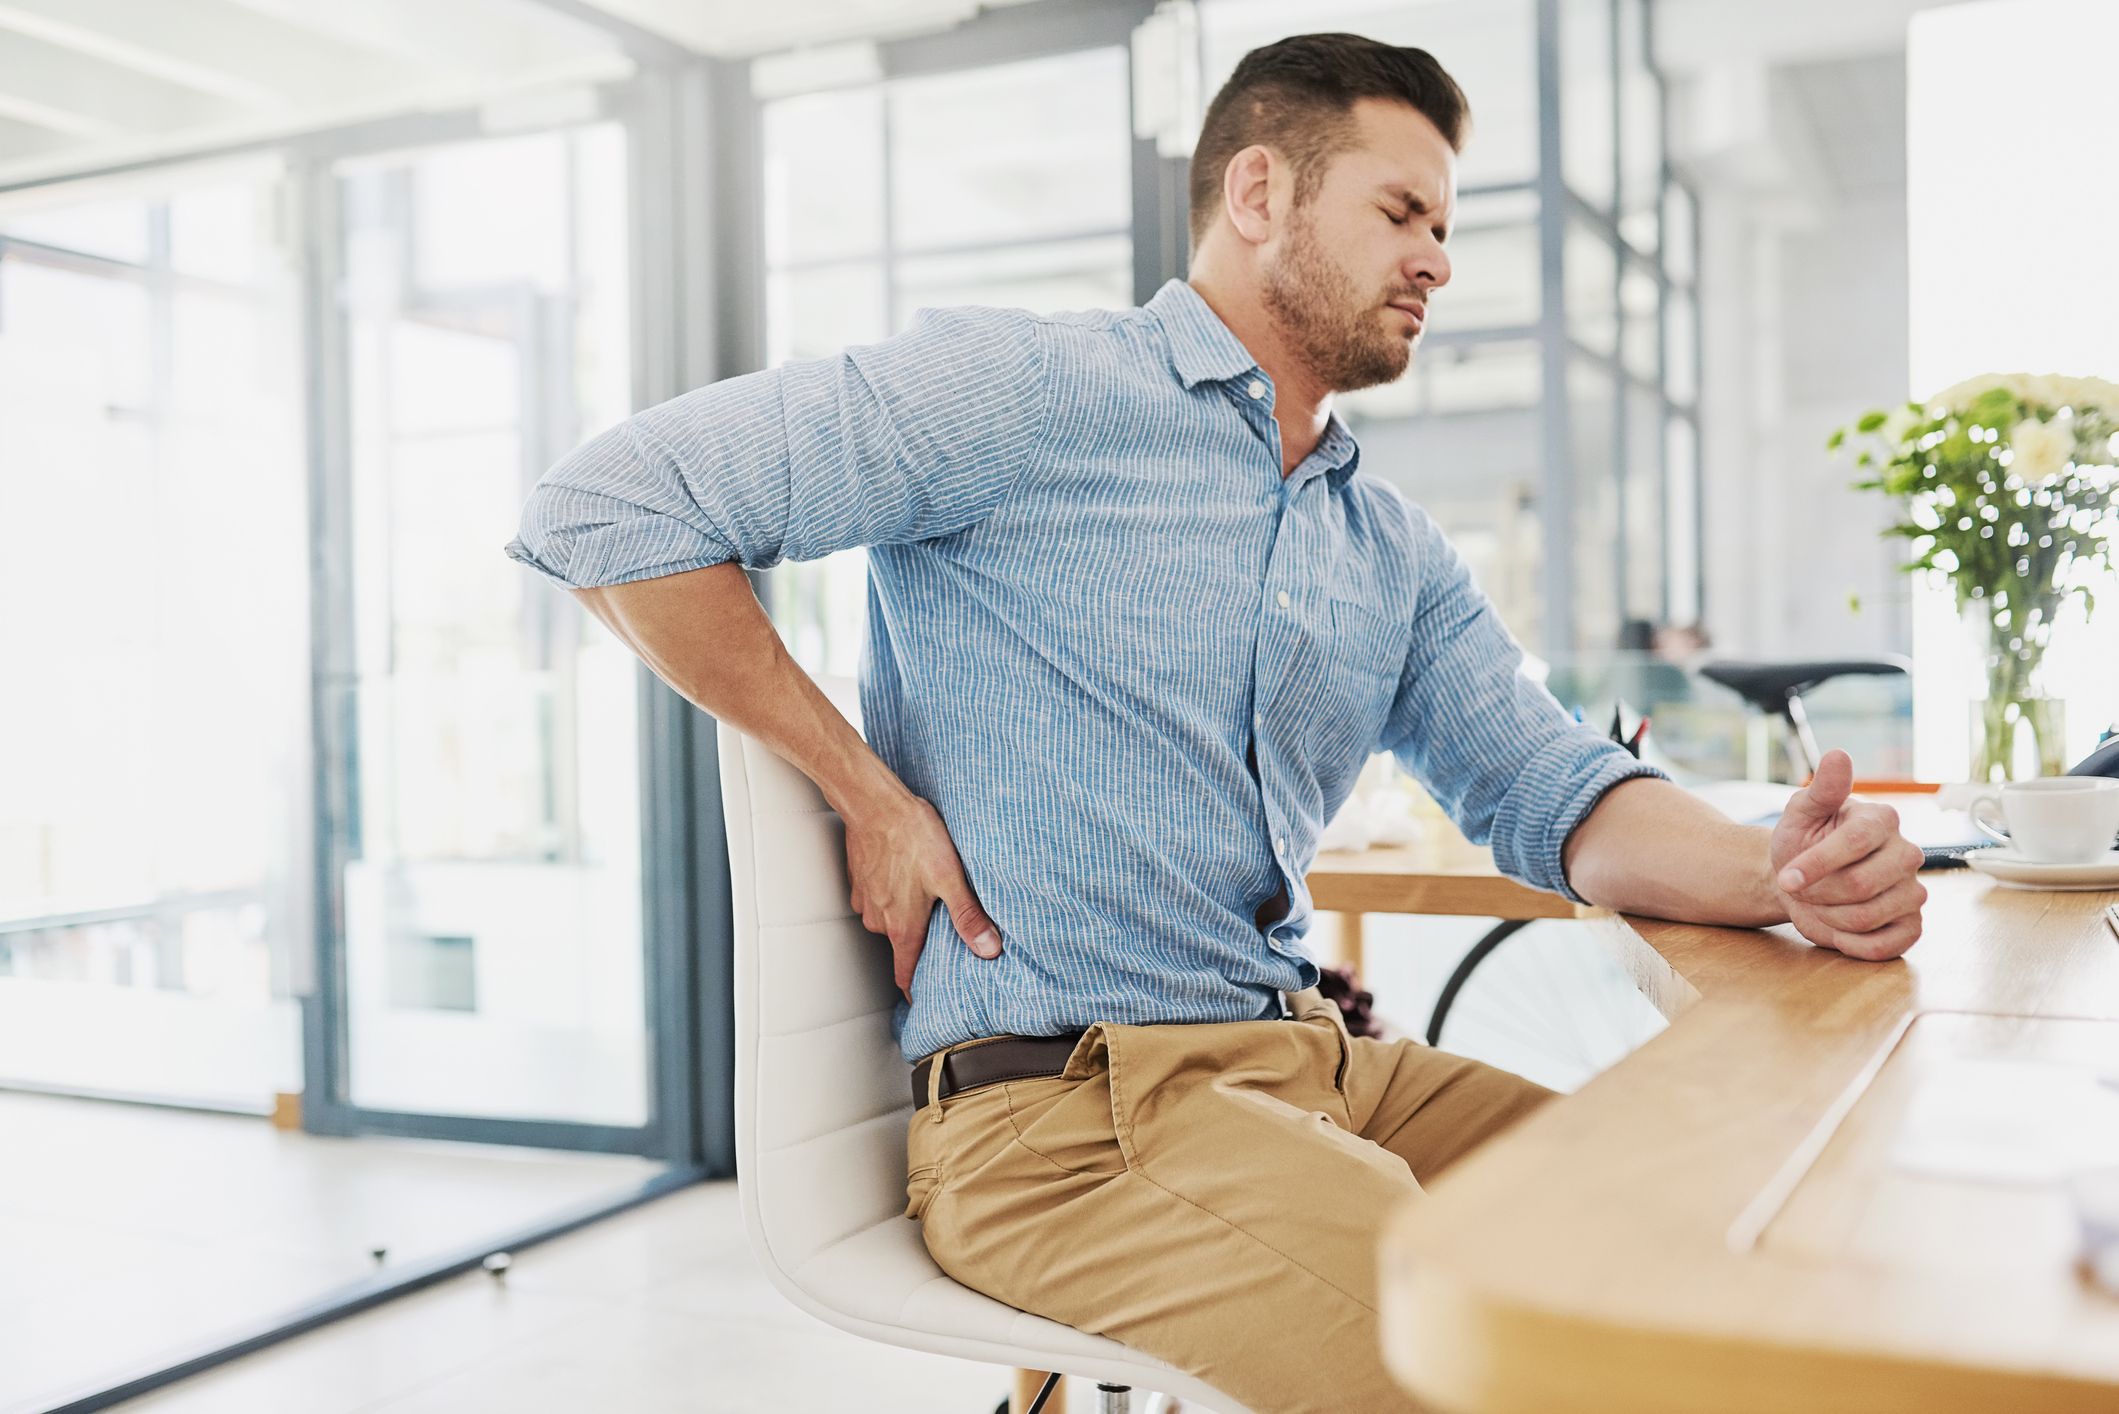 7 Exercises for Lower Back Pain - How to Prevent Back Pain